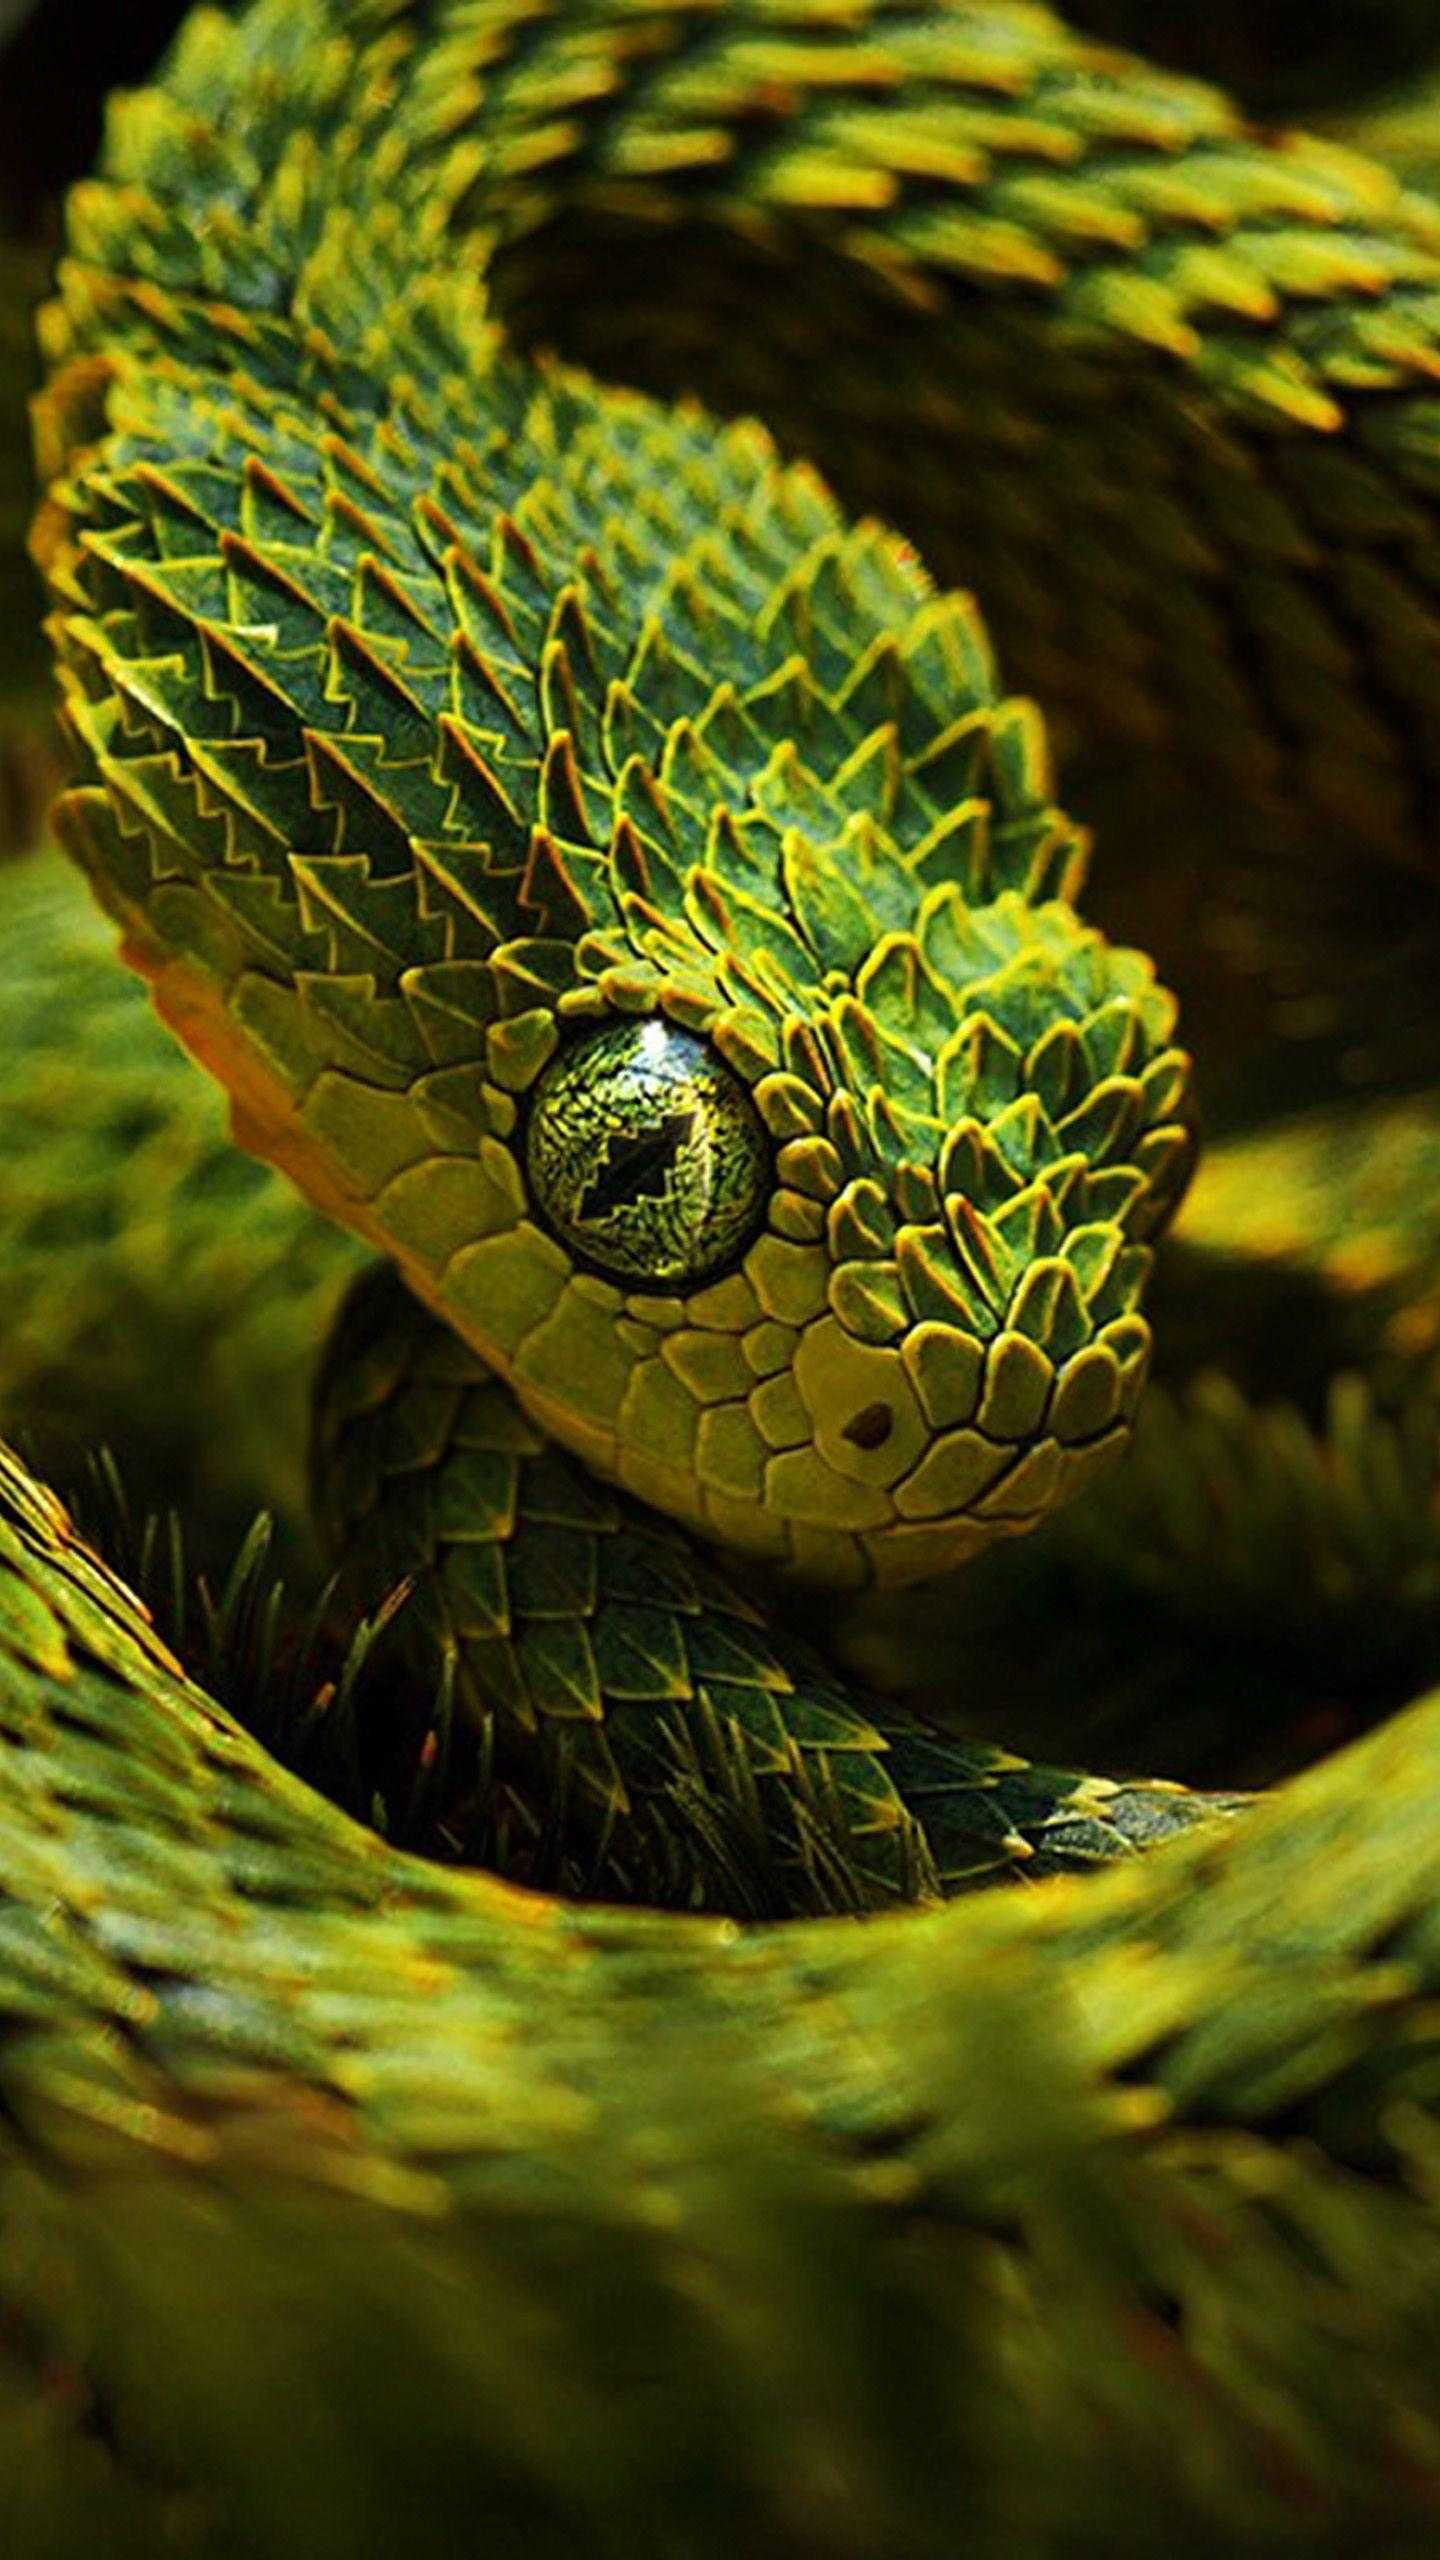 Yellow Eyes Green Python Snake On Green Plant In Blur Green Background 4K  HD Snake Wallpapers  HD Wallpapers  ID 83643